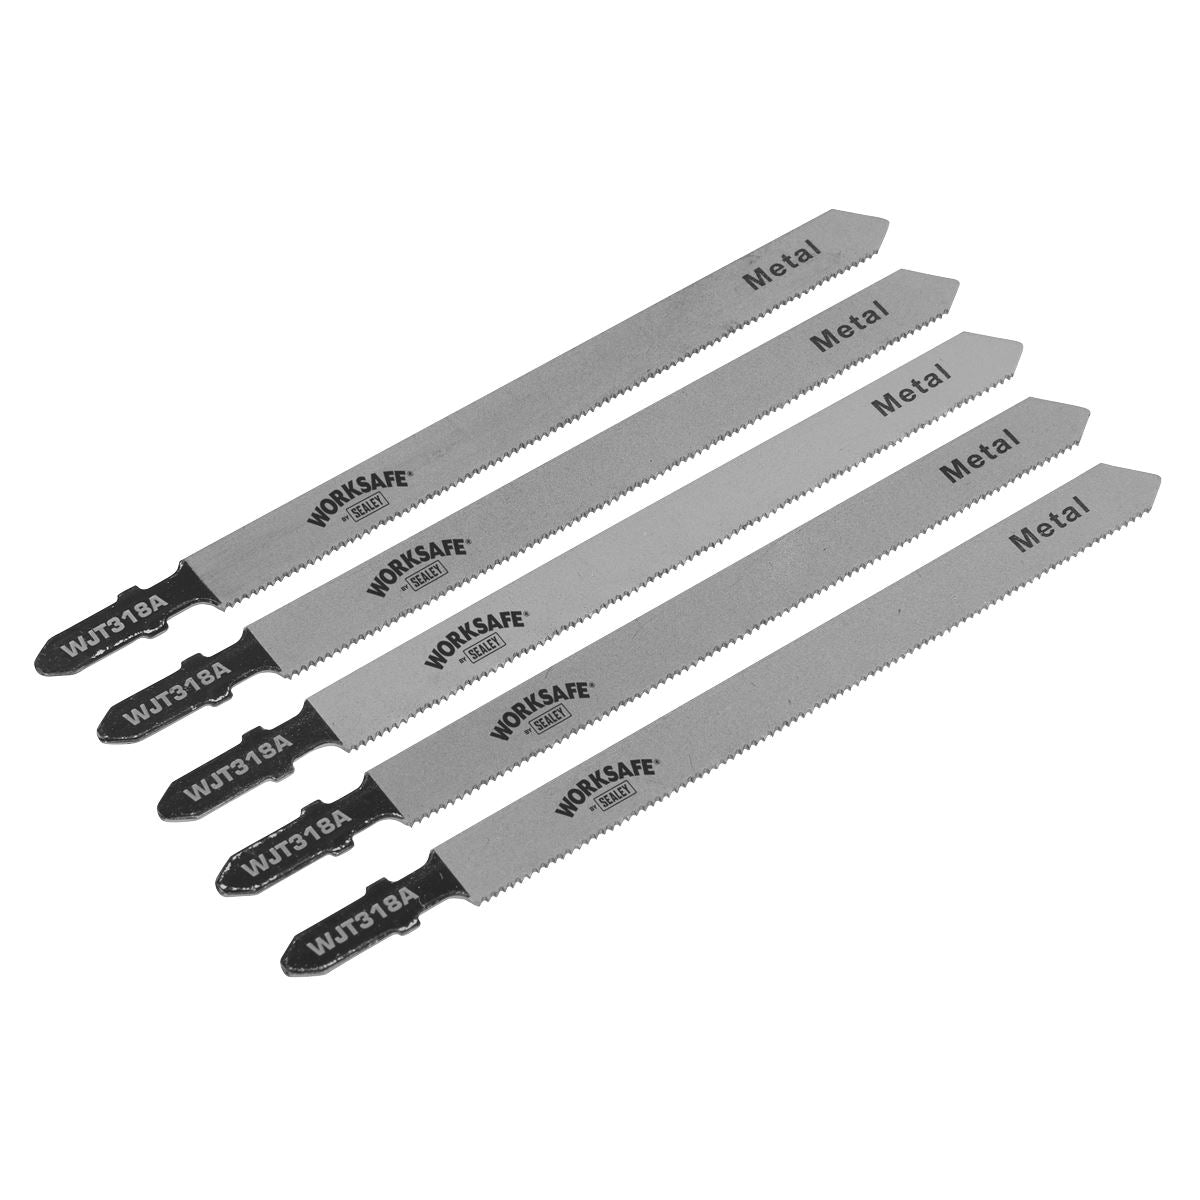 Worksafe by Sealey Jigsaw Blade Metal 105mm 21tpi - Pack of 5